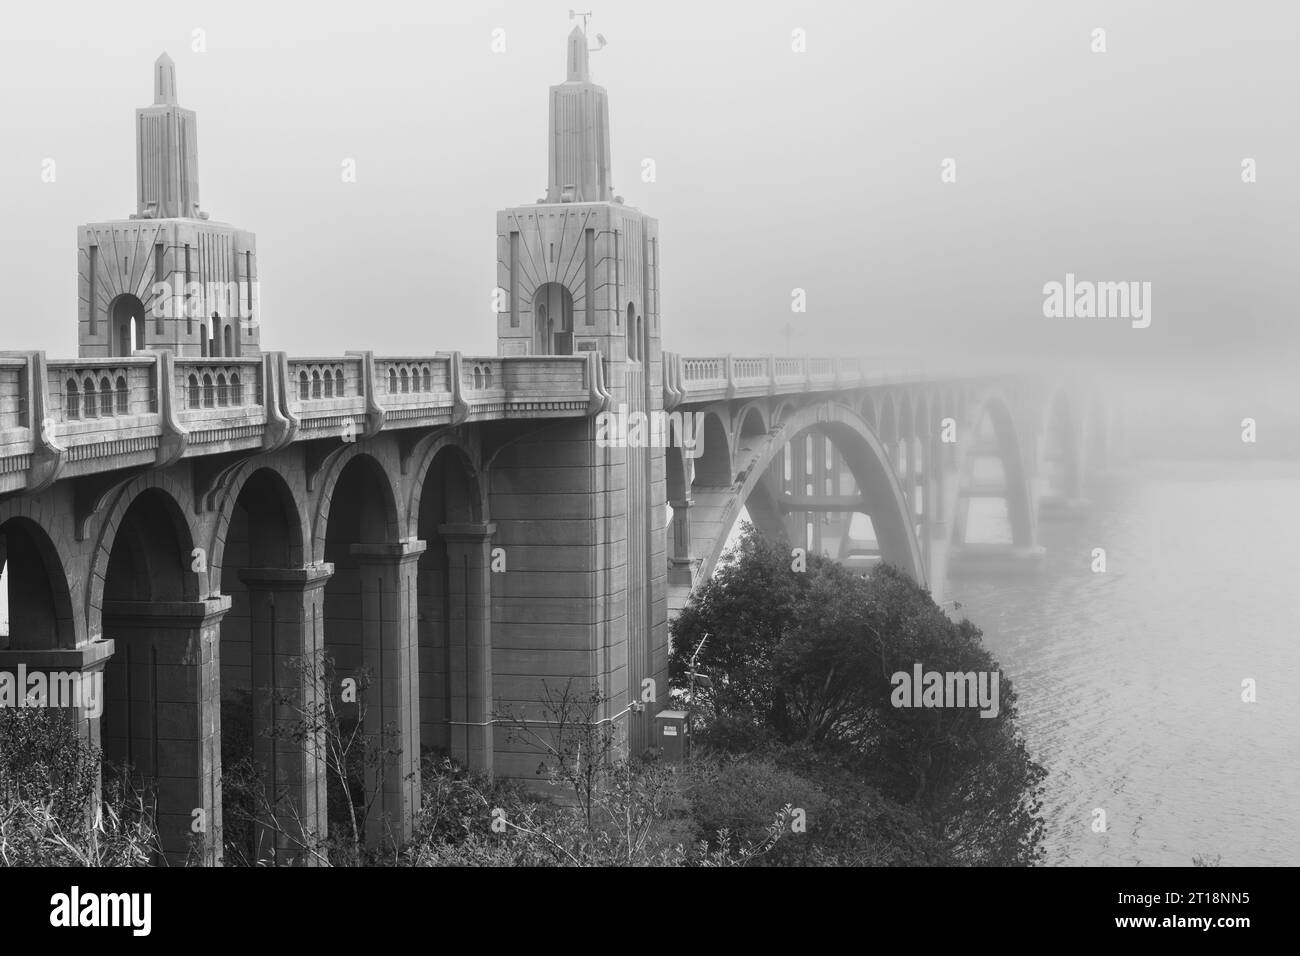 The Isaac Lee Patterson Bridge on US 101 over the mouth of the Rogue River in Gold Beach Oregon on a foggy day in black and white. Stock Photo